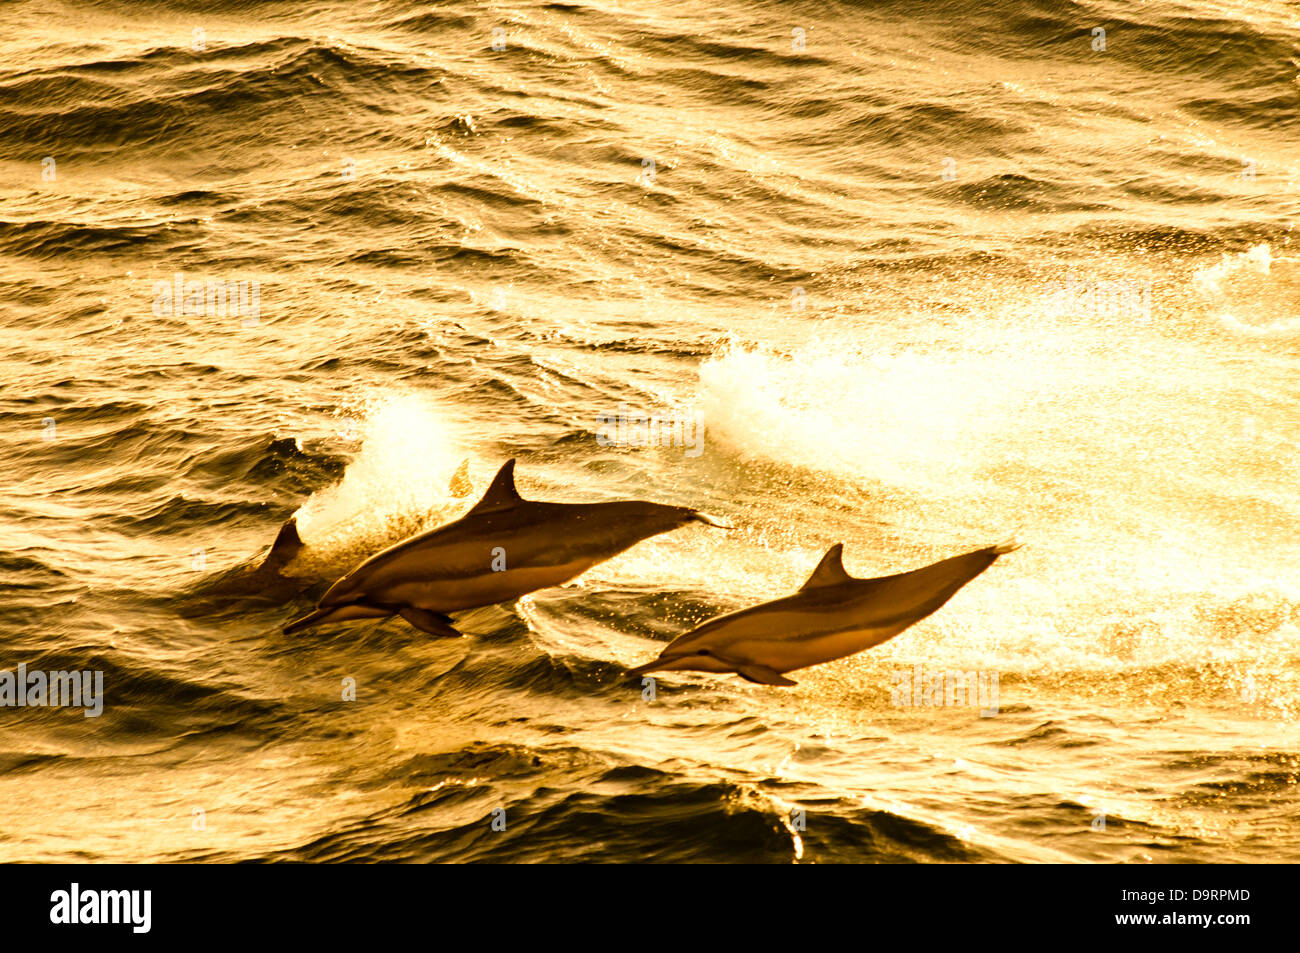 wild dolphins jumping at the ocean at sunset light Stock Photo